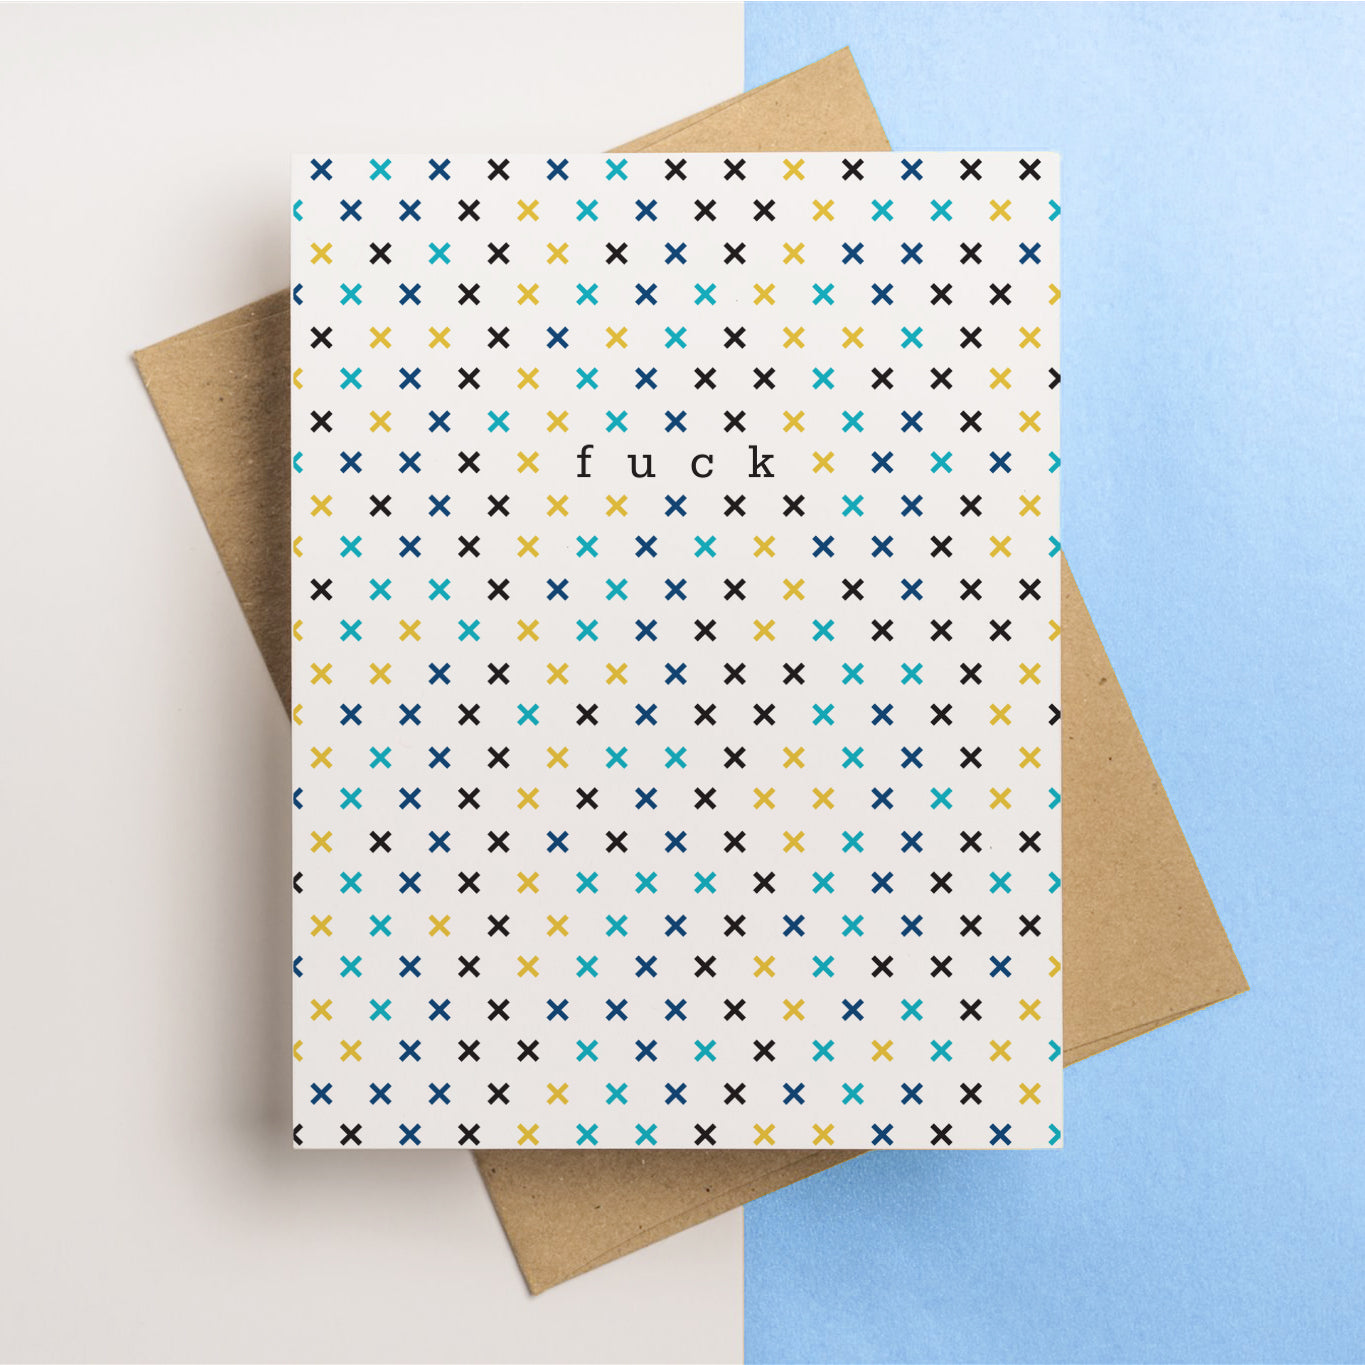 A sympathy greeting card that reads "Fuck" on the front side. An X pattern covers the front in a delightful color scheme.